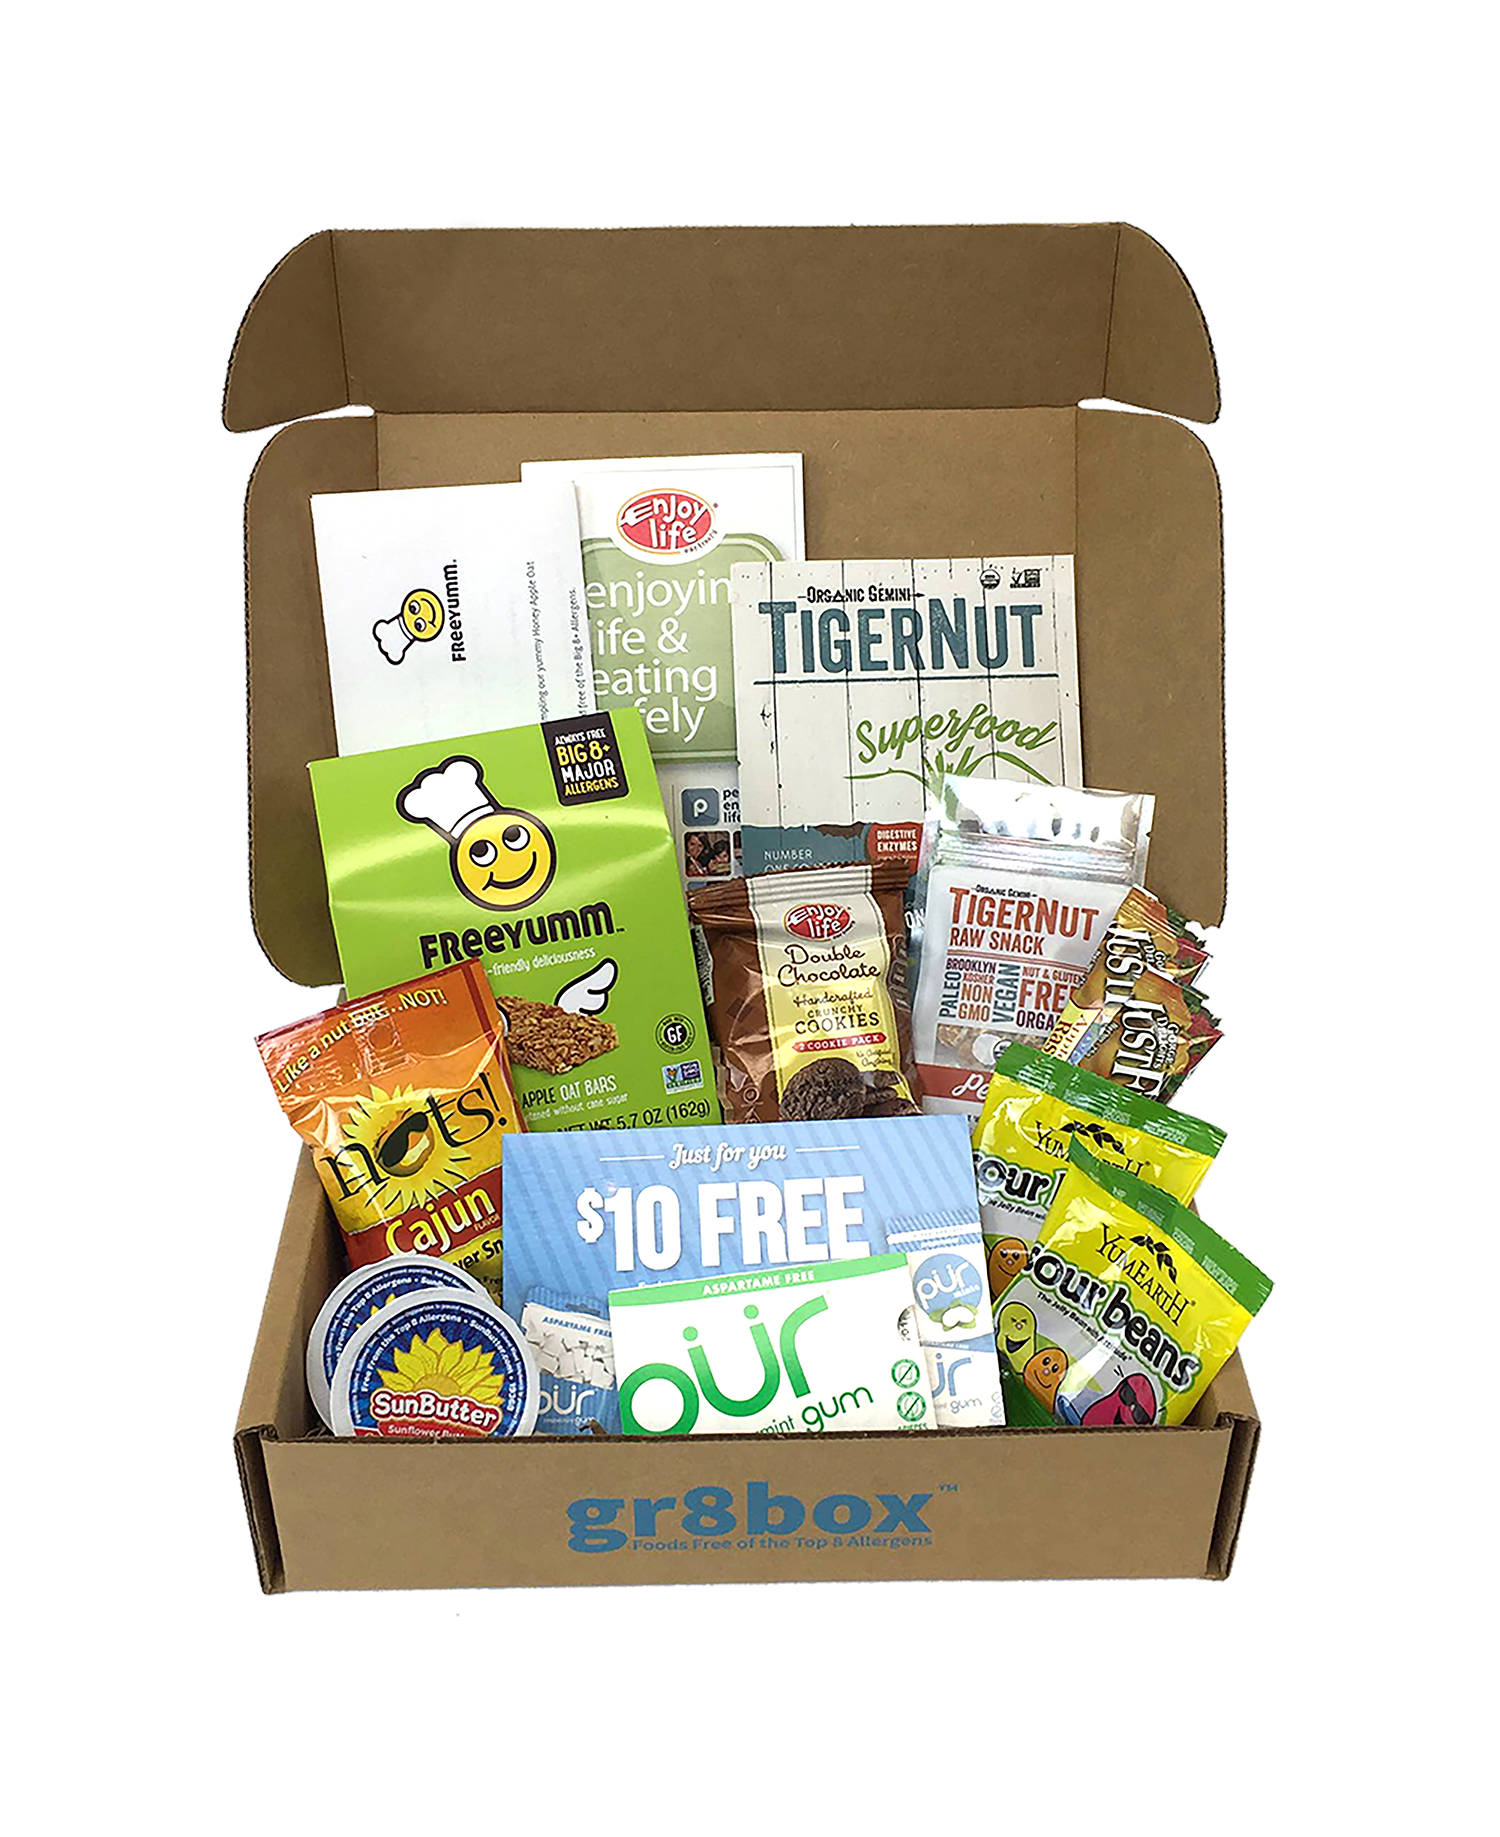 Have You Heard of gr8box, Foods Free of the Top Eight Allergens